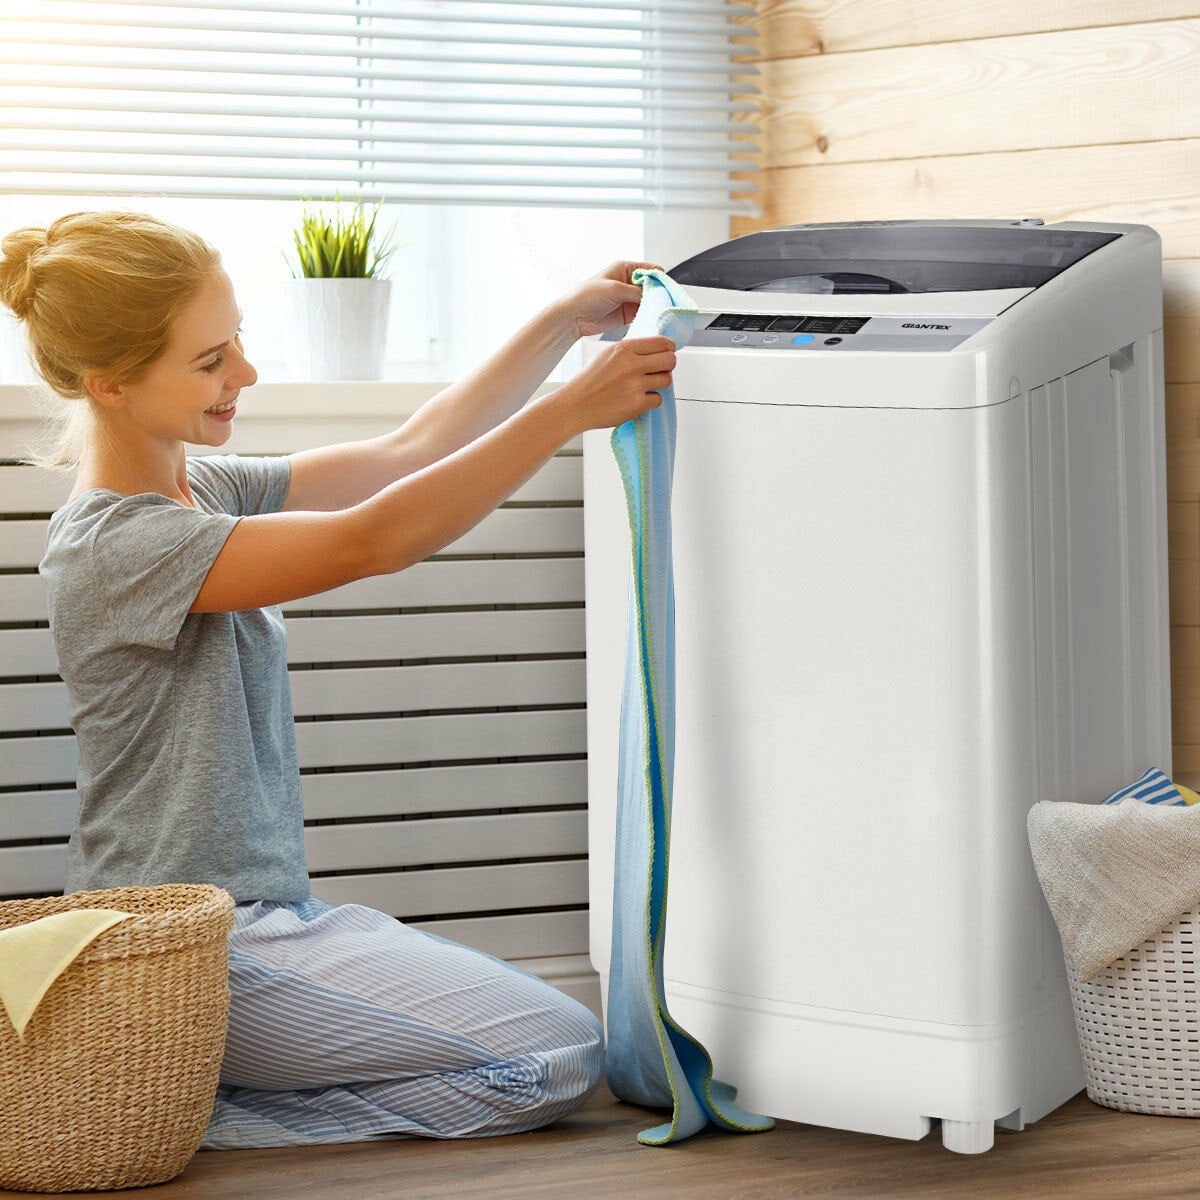 Danby 1.6 cu. ft. Compact Top Load Washing Machine in White